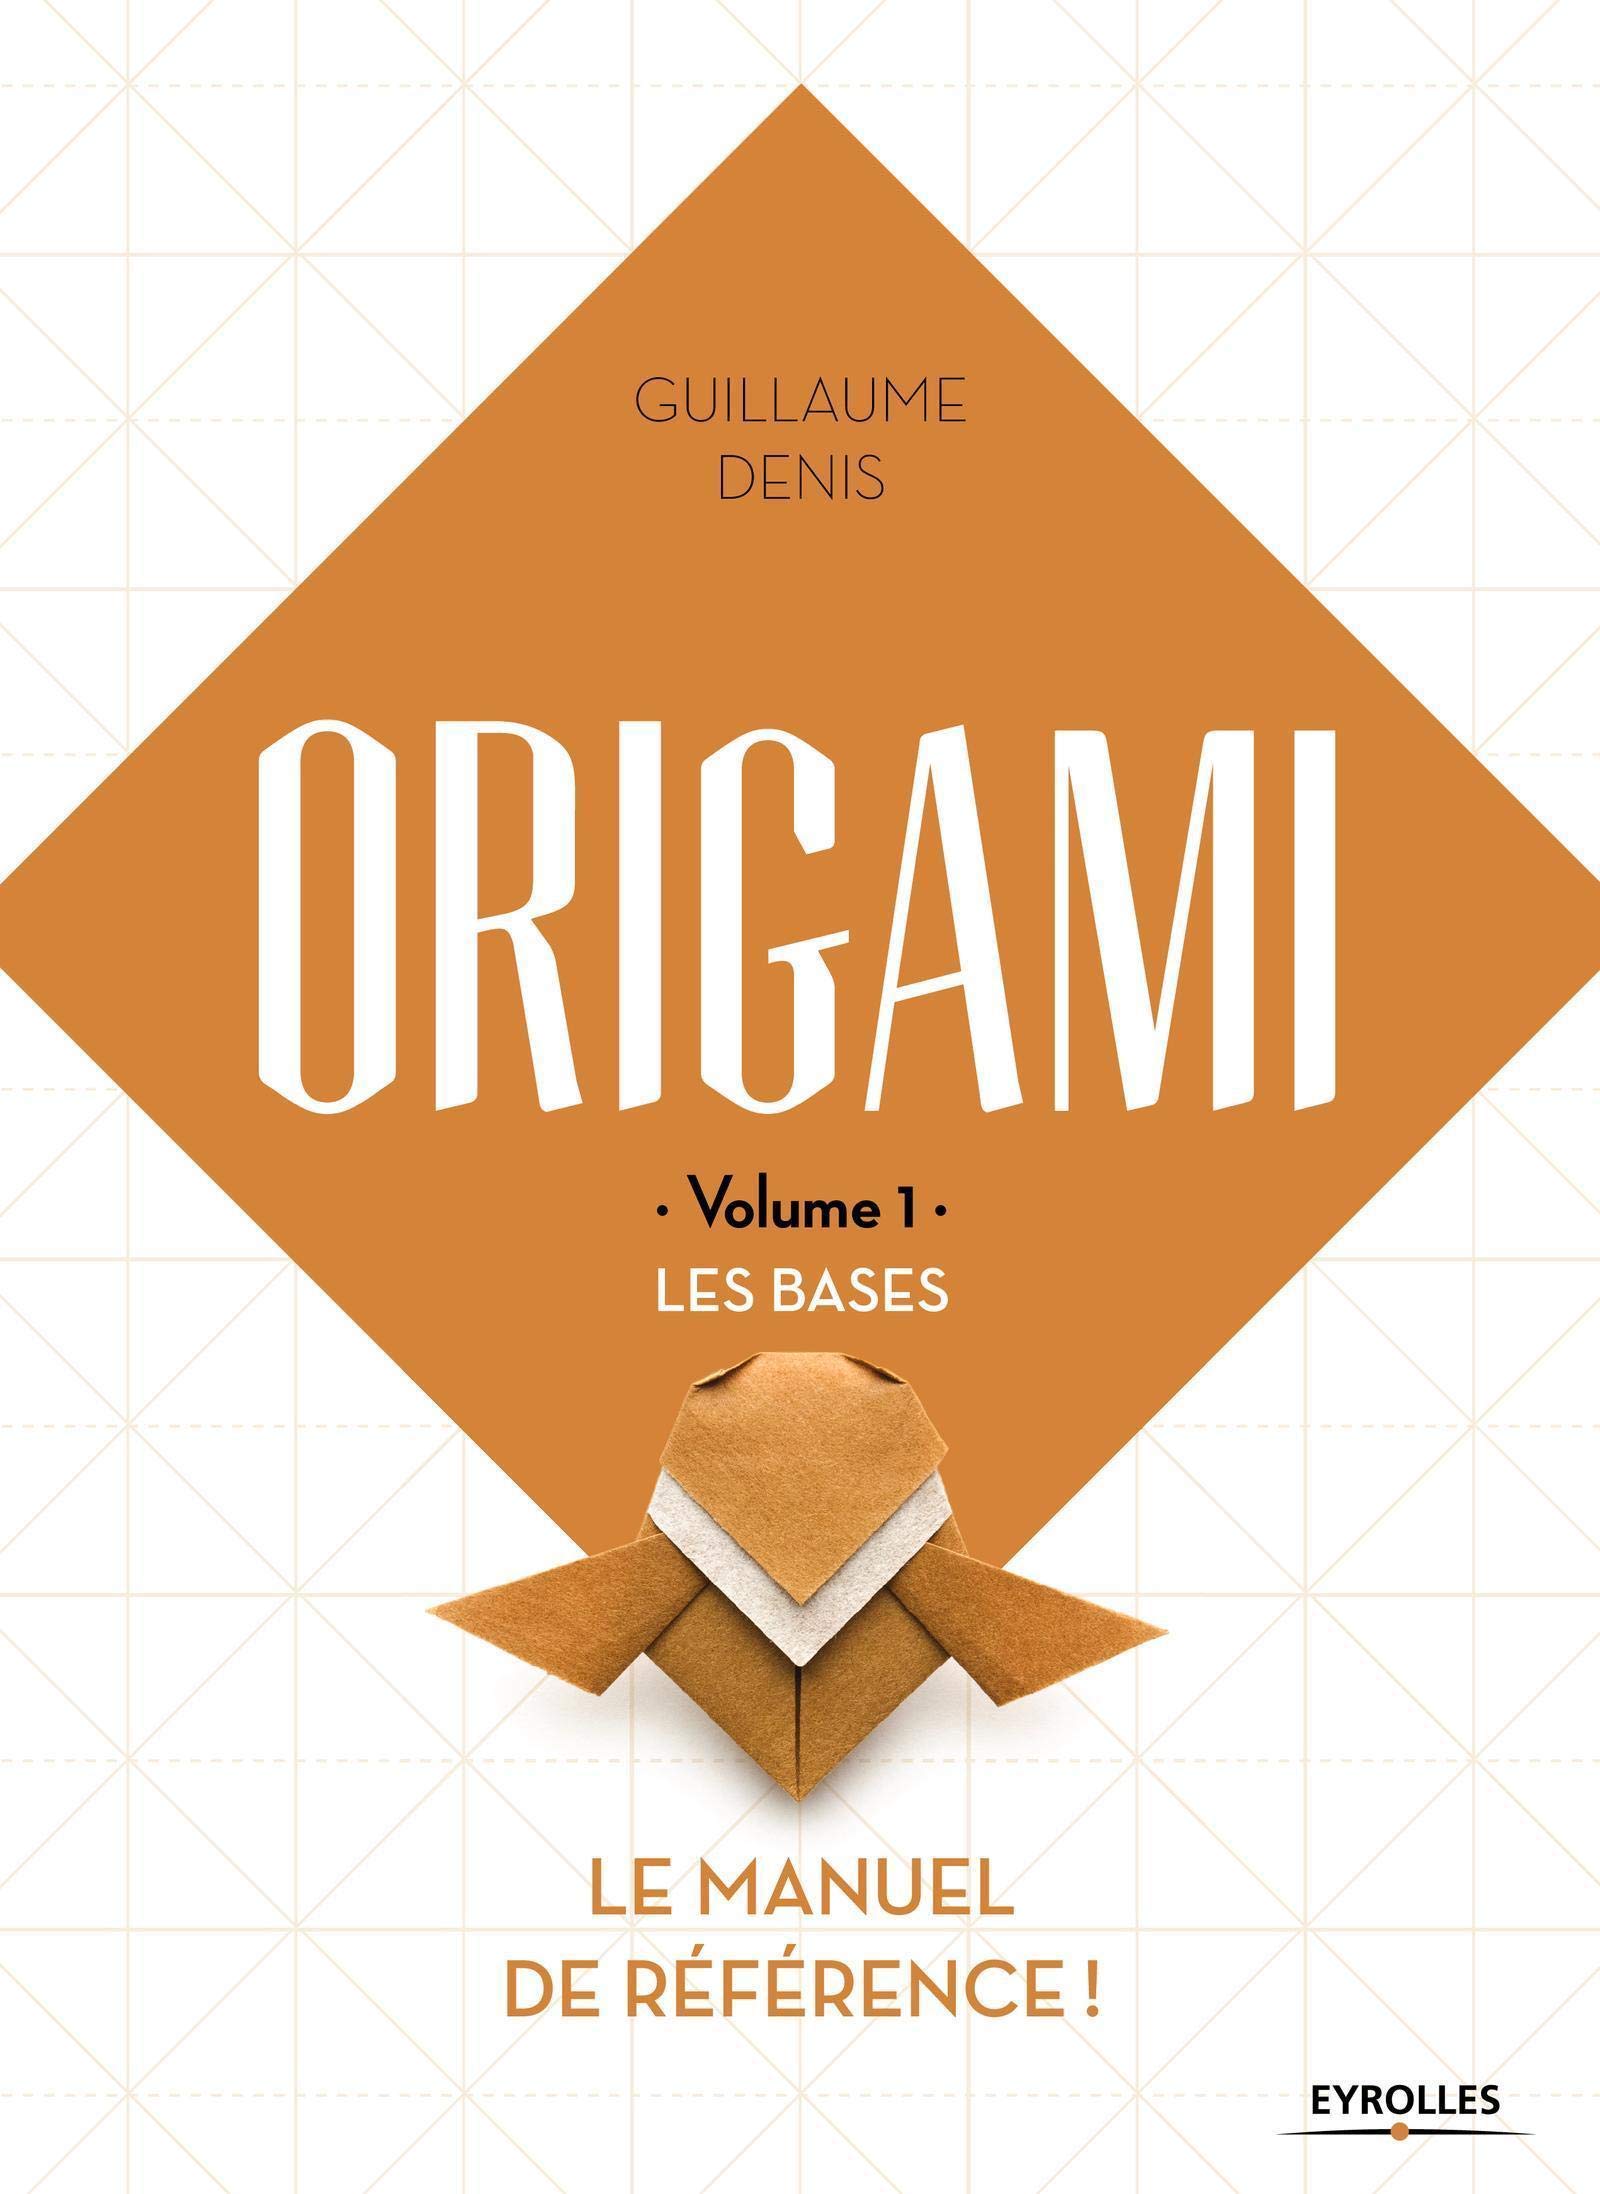 ORIGAMI - Volume 1 - LES BASES : page 224.